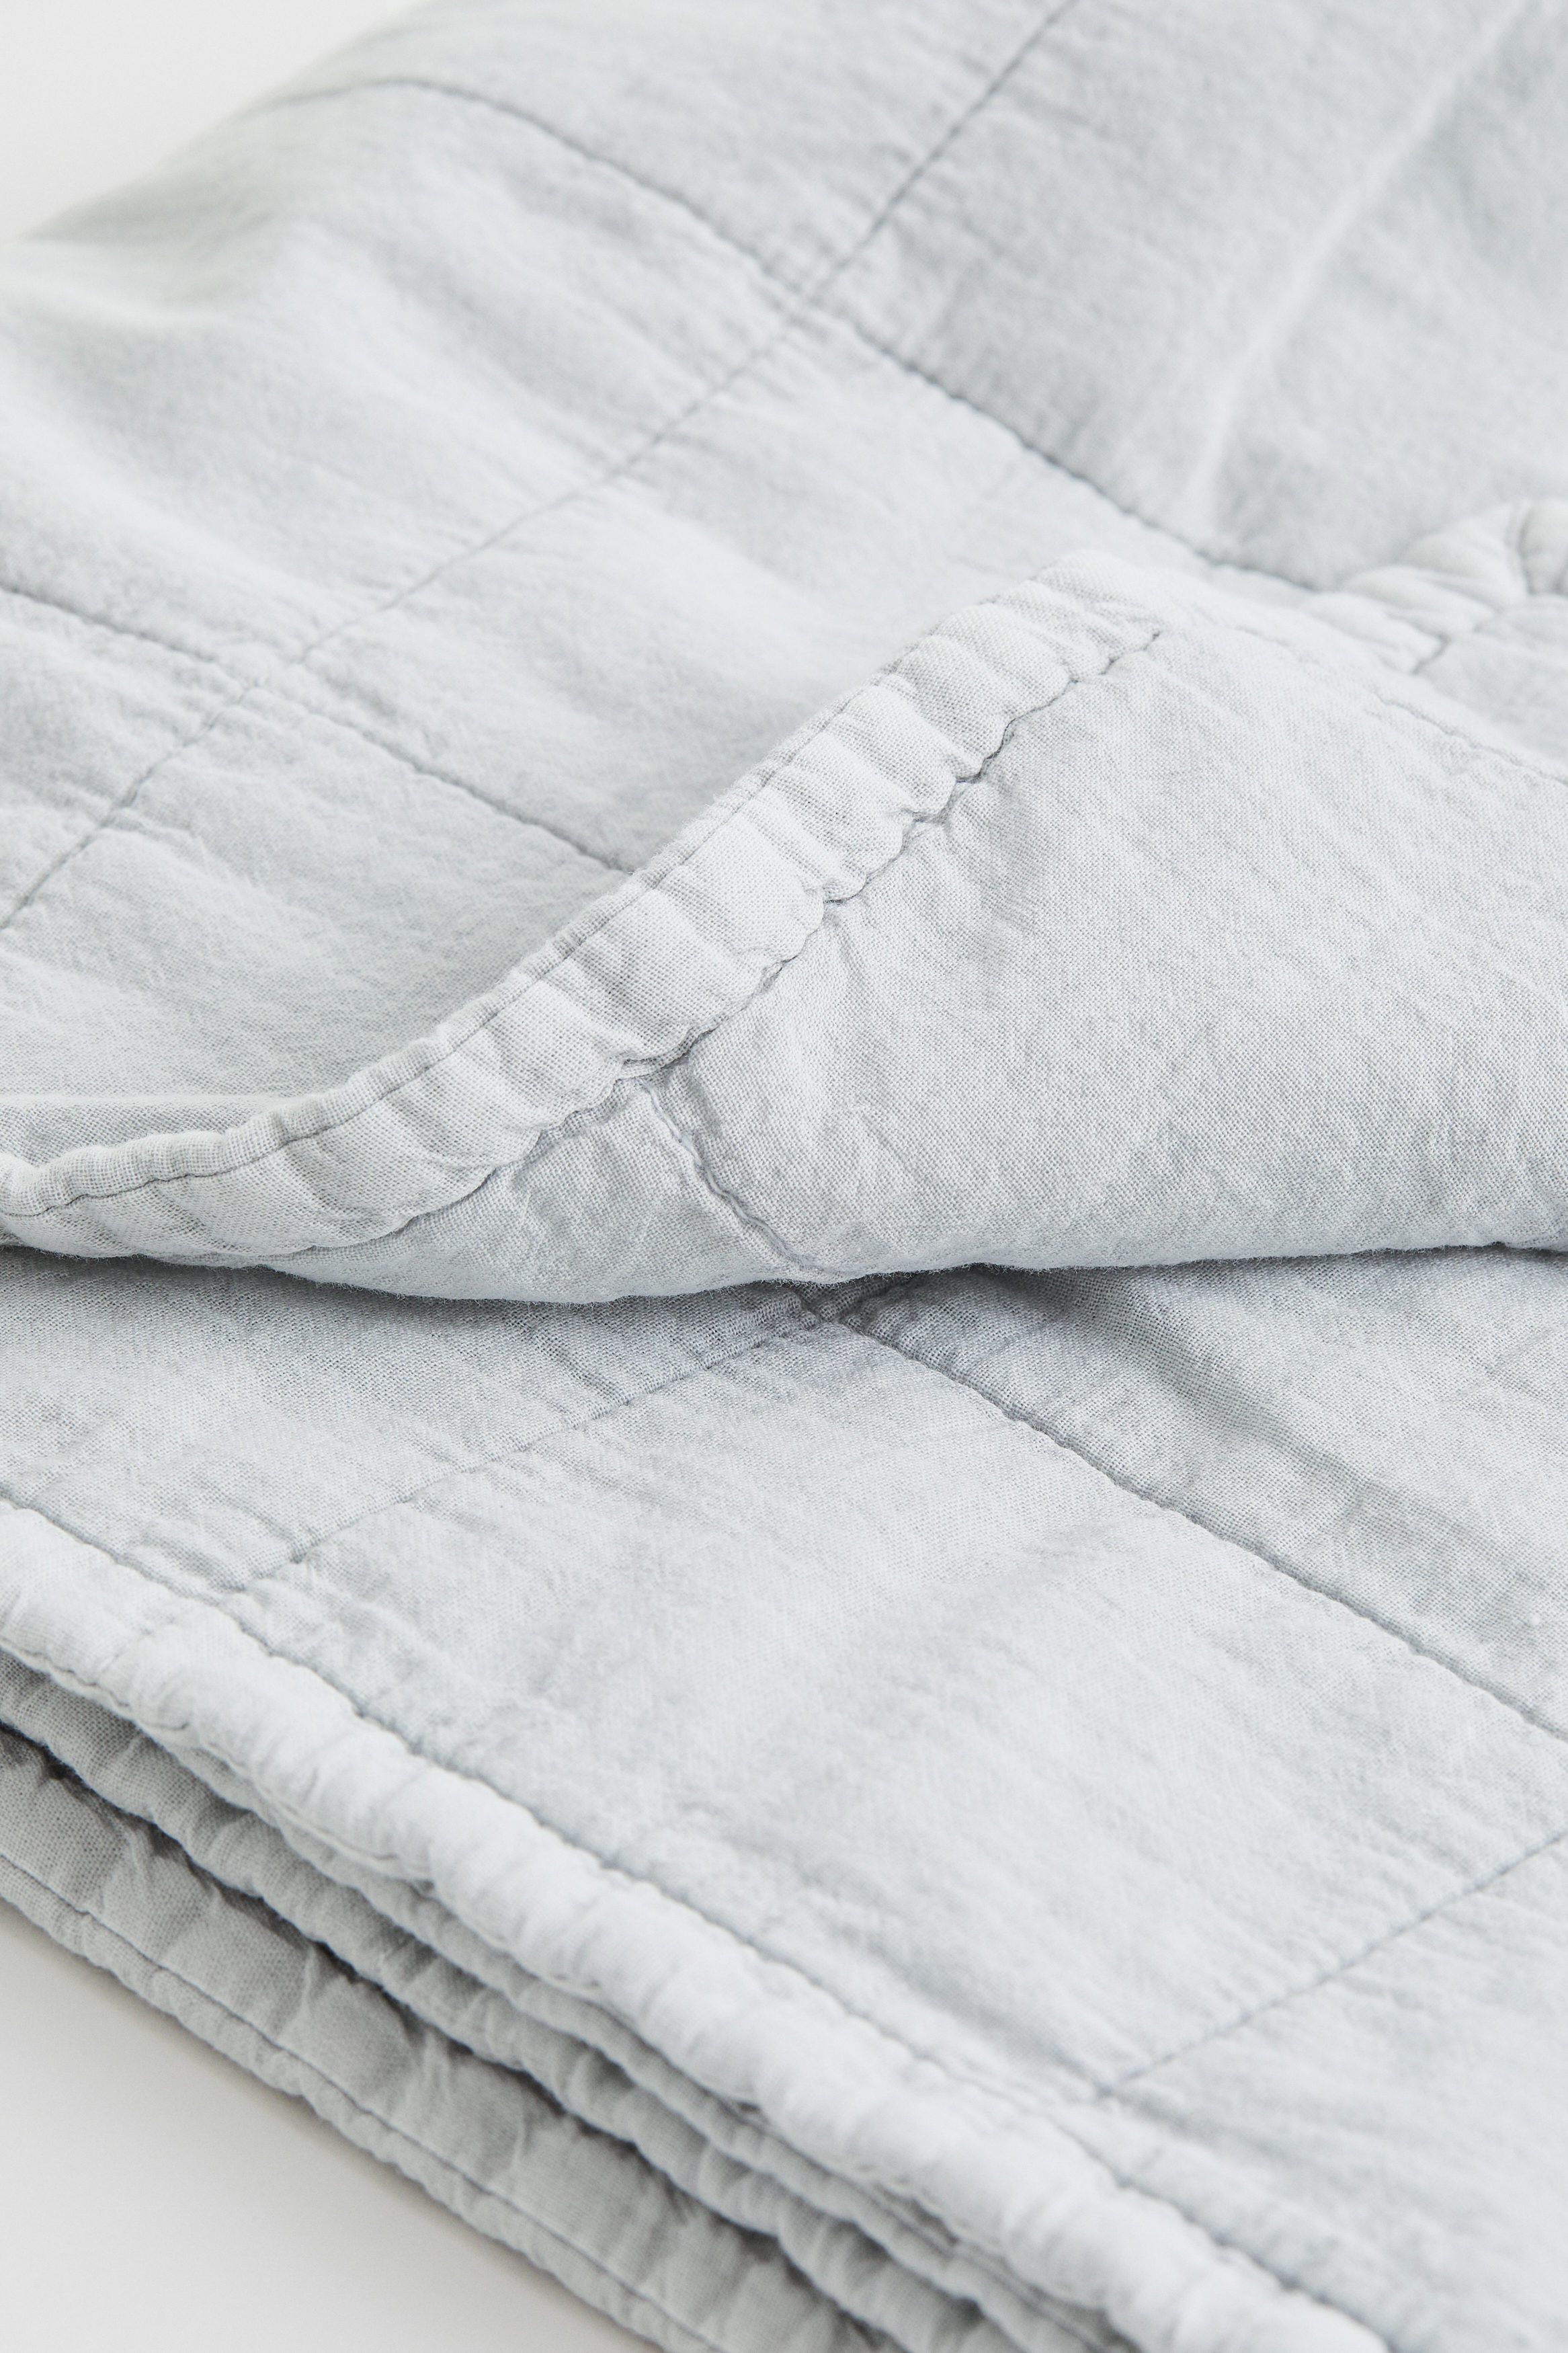 Buy Quilted bedspread Online | H&M Qatar